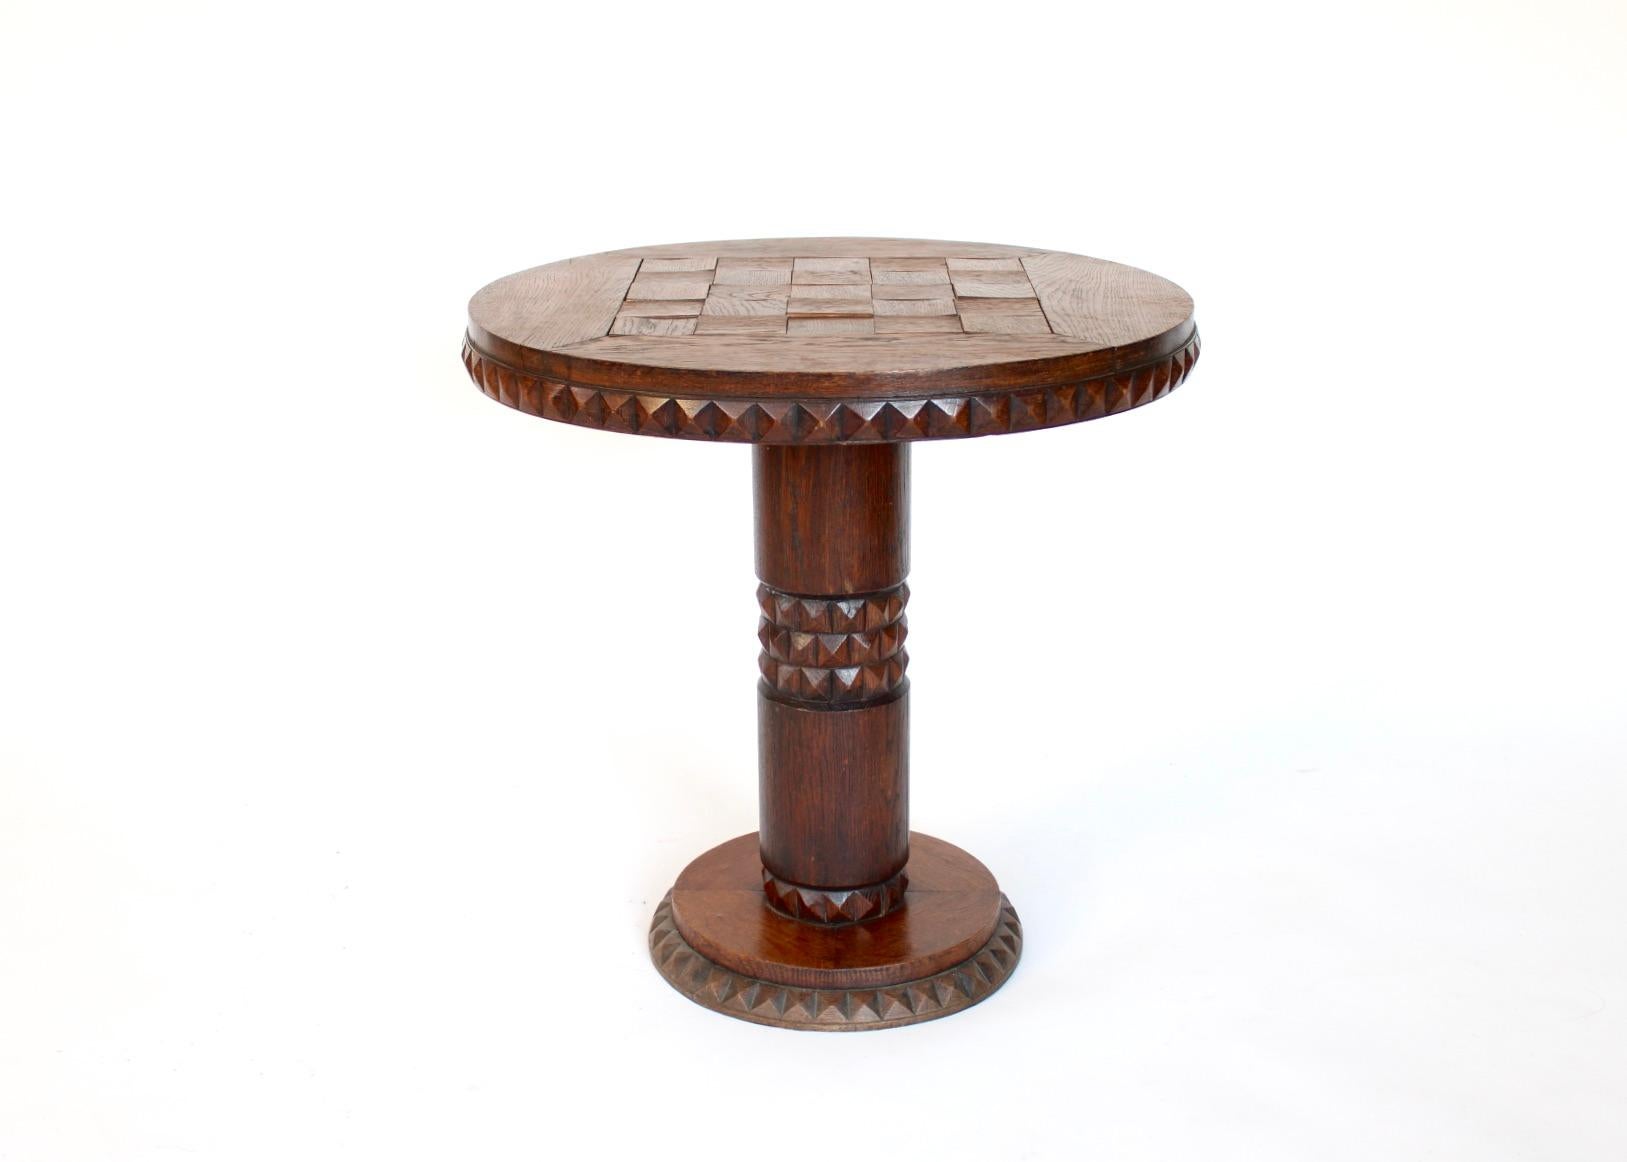 Sculptural French Art Deco period or c1940 carved side table. Hand carved individual diamond pyramid faceted motif oak embellishments along the edge. Each in prefect original condition. The motif continues on the column midway with 3 rows of the